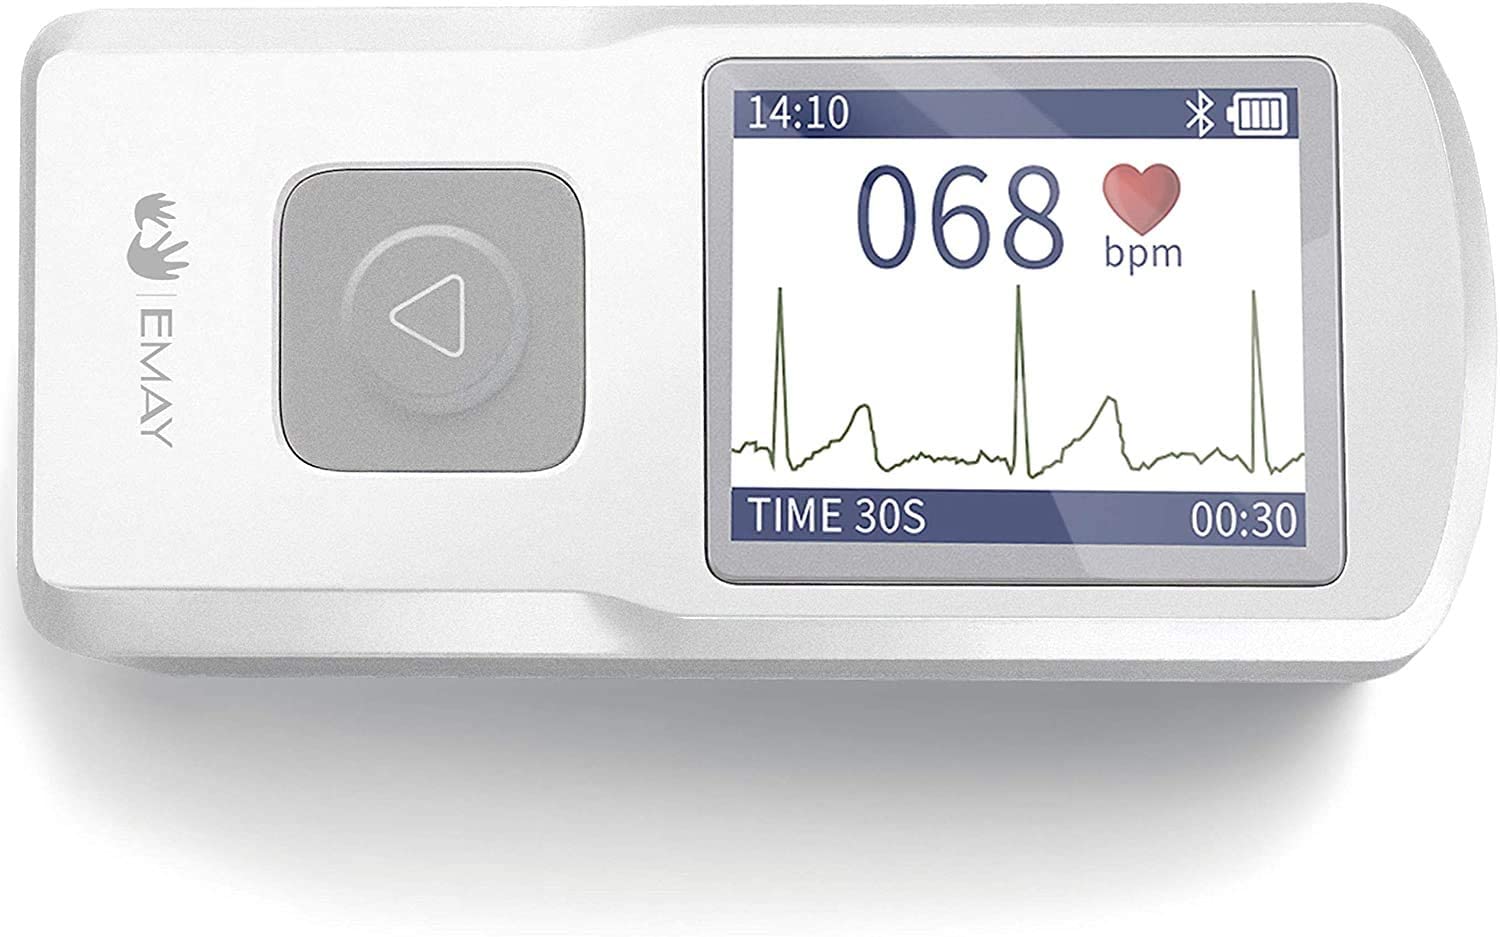 Portable EKG Monitoring Device (for iPhone & Android, Mac & Windows) | Personal EKG Heart Monitor to Track Heart Rate & Rhythm for Heart Performance